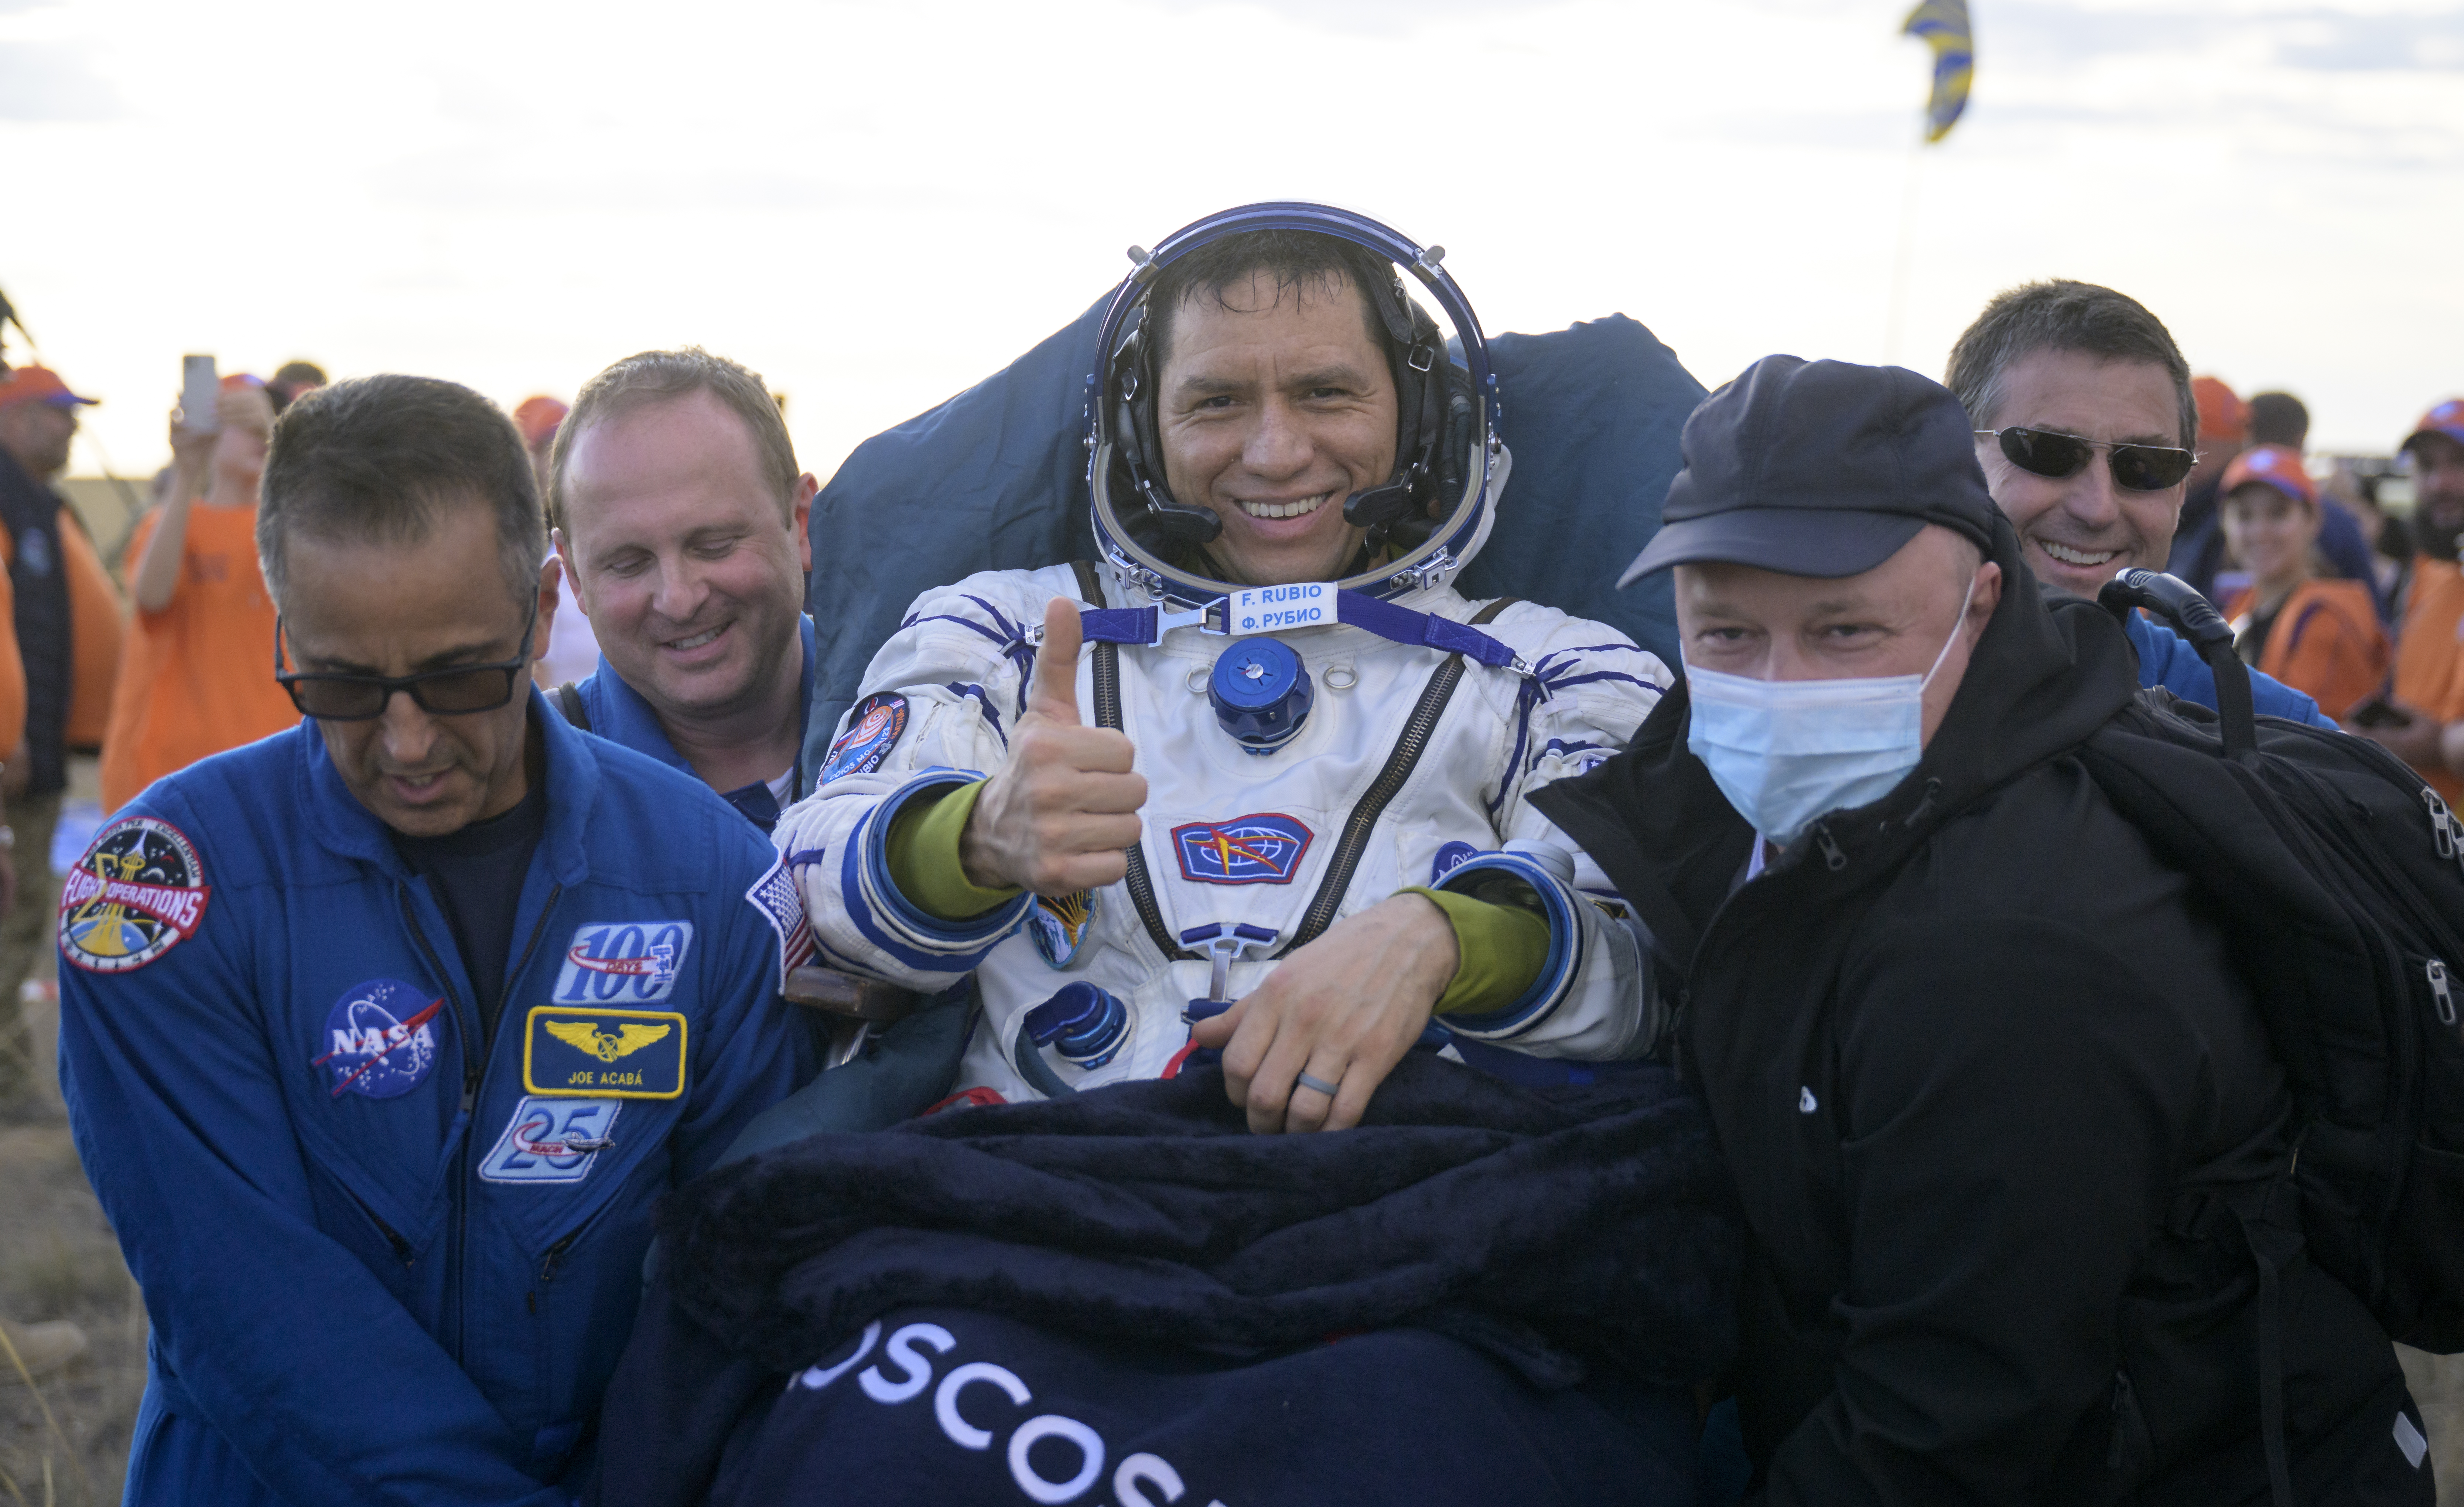 Astronaut Frank Rubio gives the camera a thumbs up as he is carried by four men, including NASA astronaut Joe Acaba (front left). Rubio wears a white spacesuit with blue accents and several mission patches. He rests against the propped-up top portion of a stretcher and has a dark blue blanket on his lap.